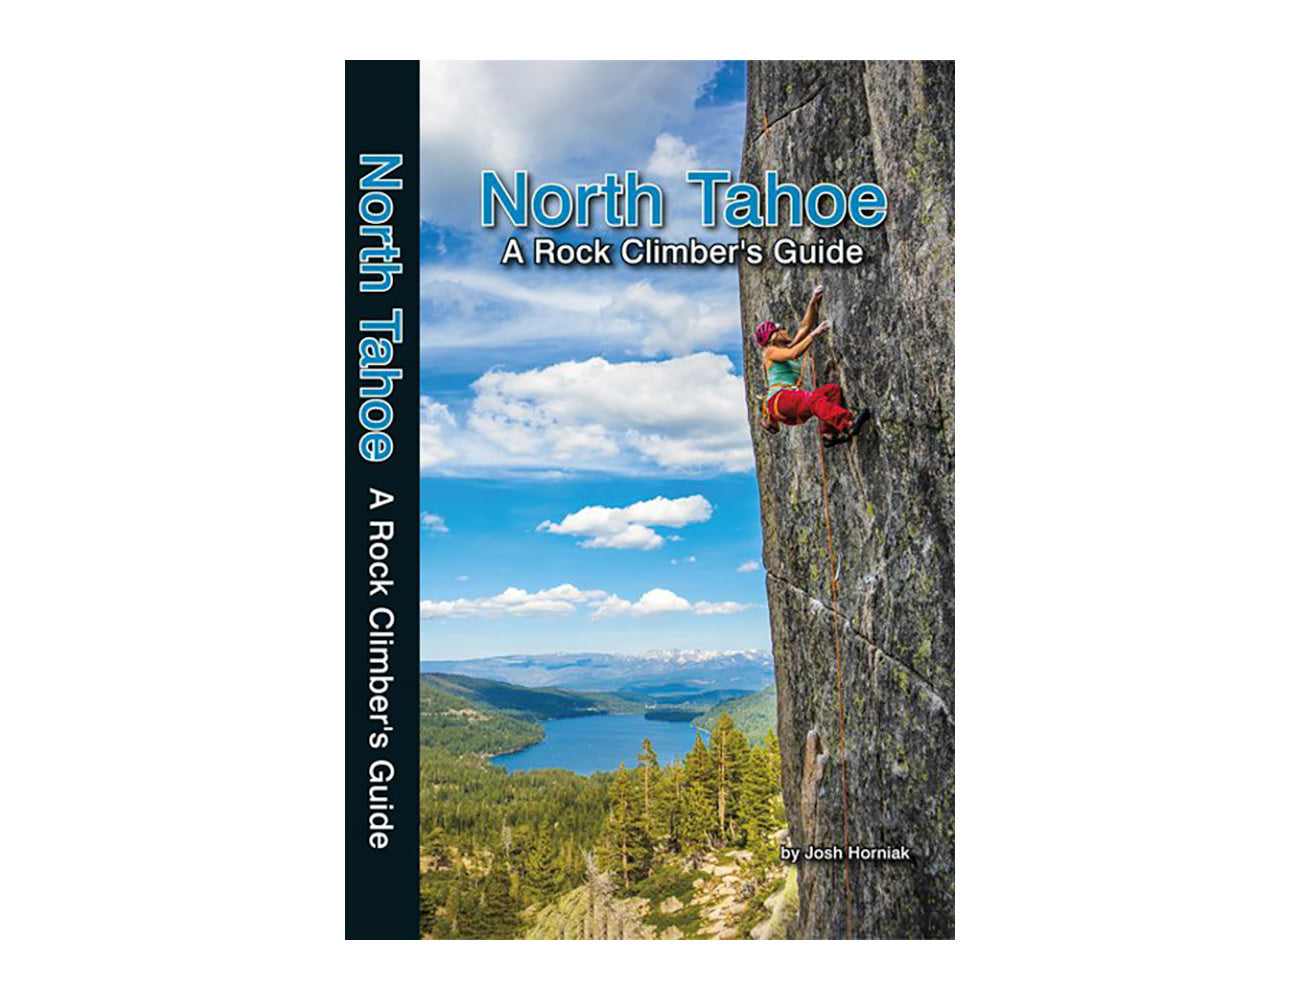 North Tahoe: A Rock Climber's Guide